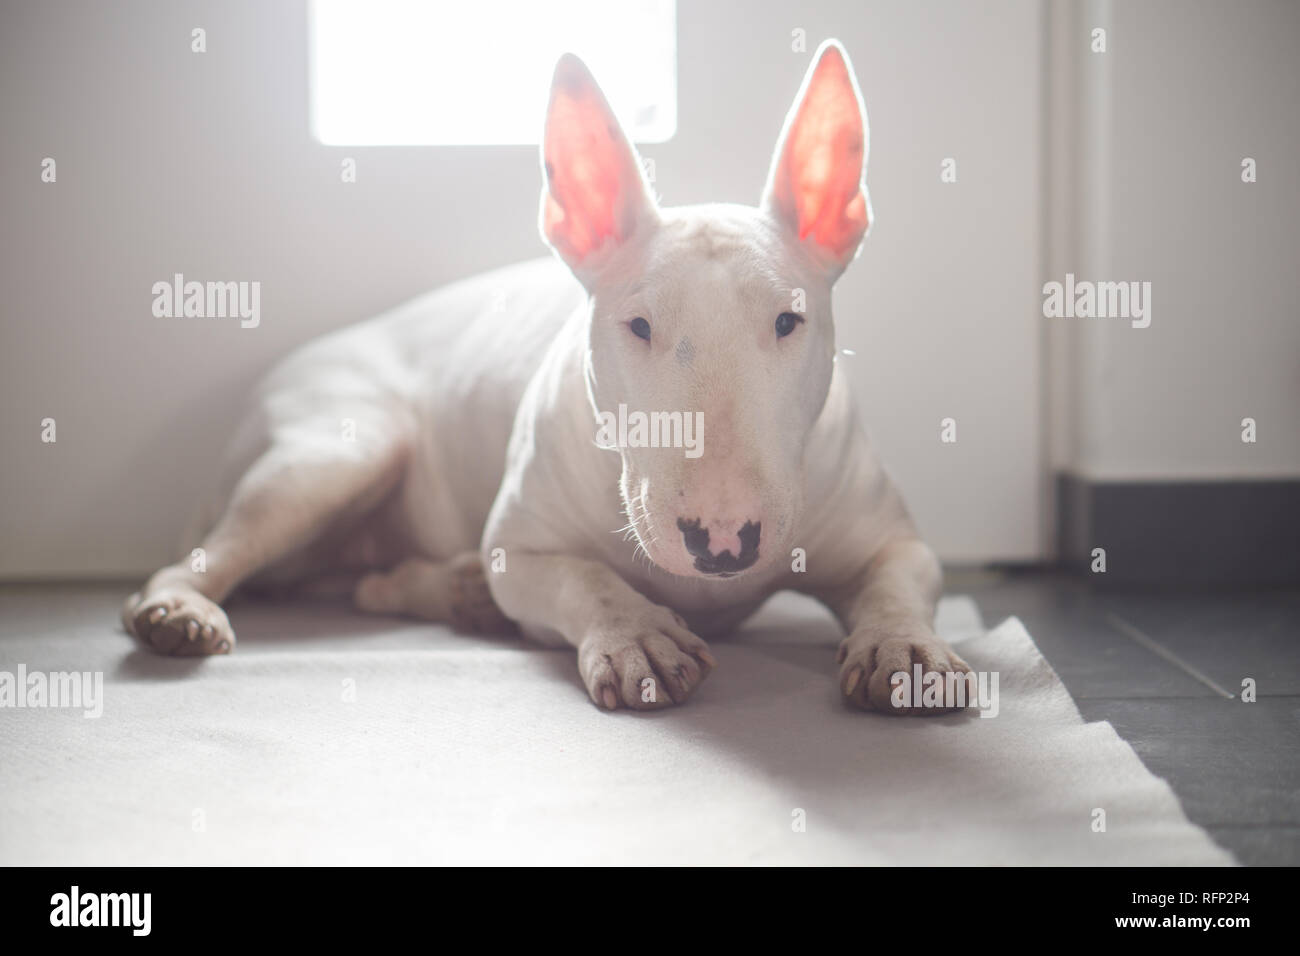 English Bull terrier lying on the floor with light behind it Stock Photo